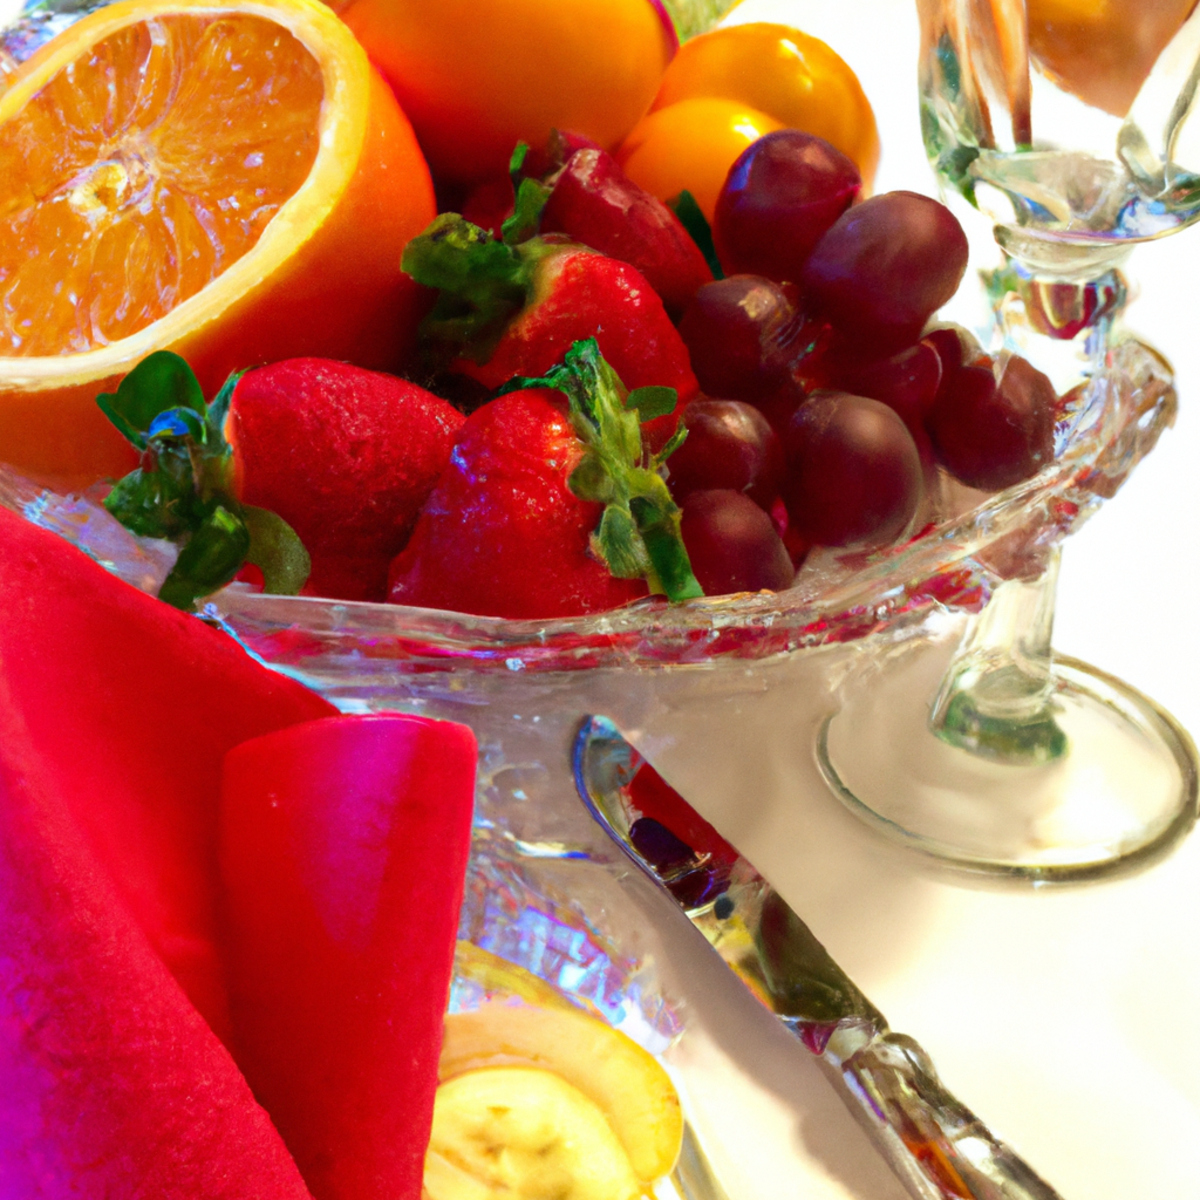 Close-up of elegantly set dining table with colorful fruits, water, silverware, fireplace, and medical books. Symbolizes nutrition and comfort for managing Gastric antral vascular ectasia (GAVE).